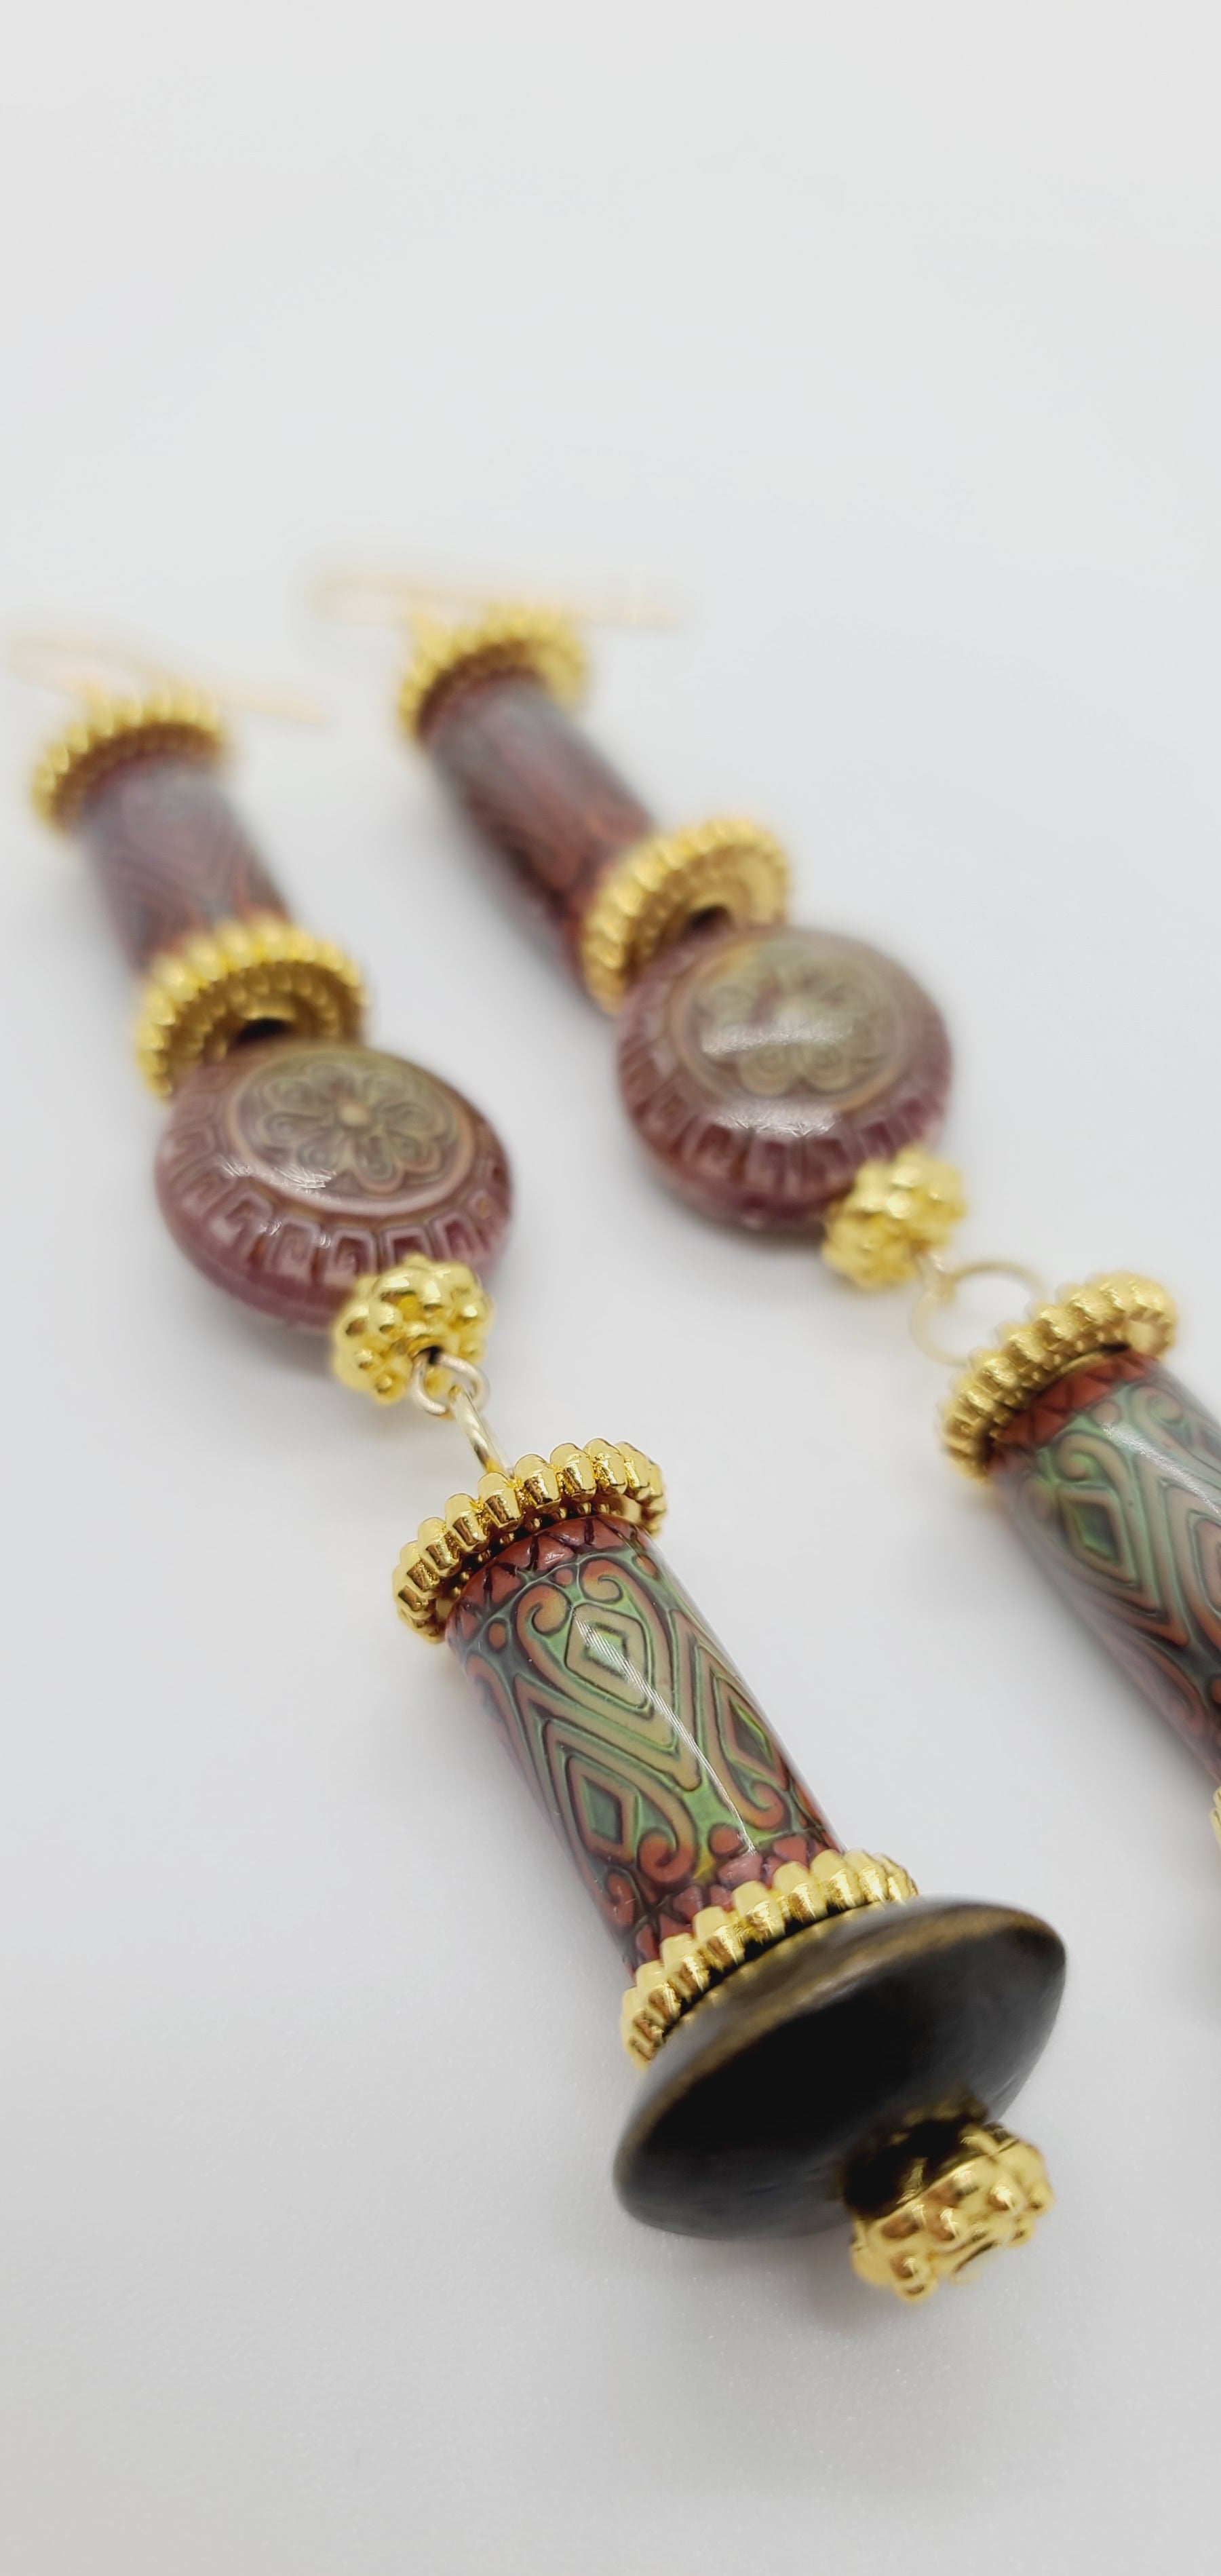 Length: 4 inches | Weight: 0.7 ounces  Distinctly You! These earrings are made with patterned printed wooden covered with resin beads, wooden Bicone beads, gold rondelles, and gold spacers.